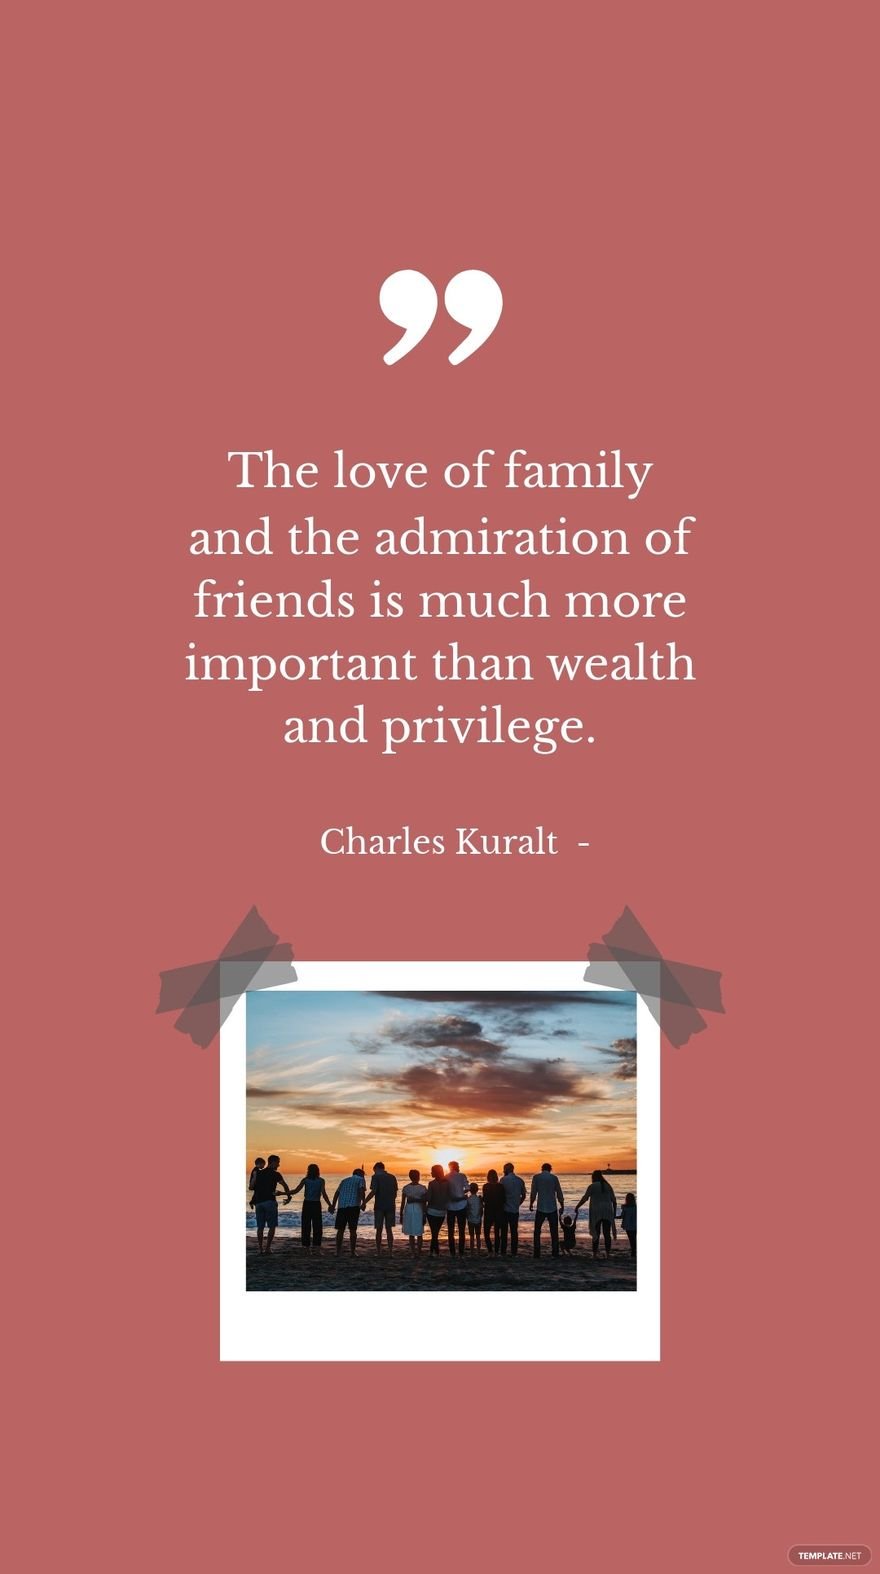 Charles Kuralt  - The love of family and the admiration of friends is much more important than wealth and privilege.